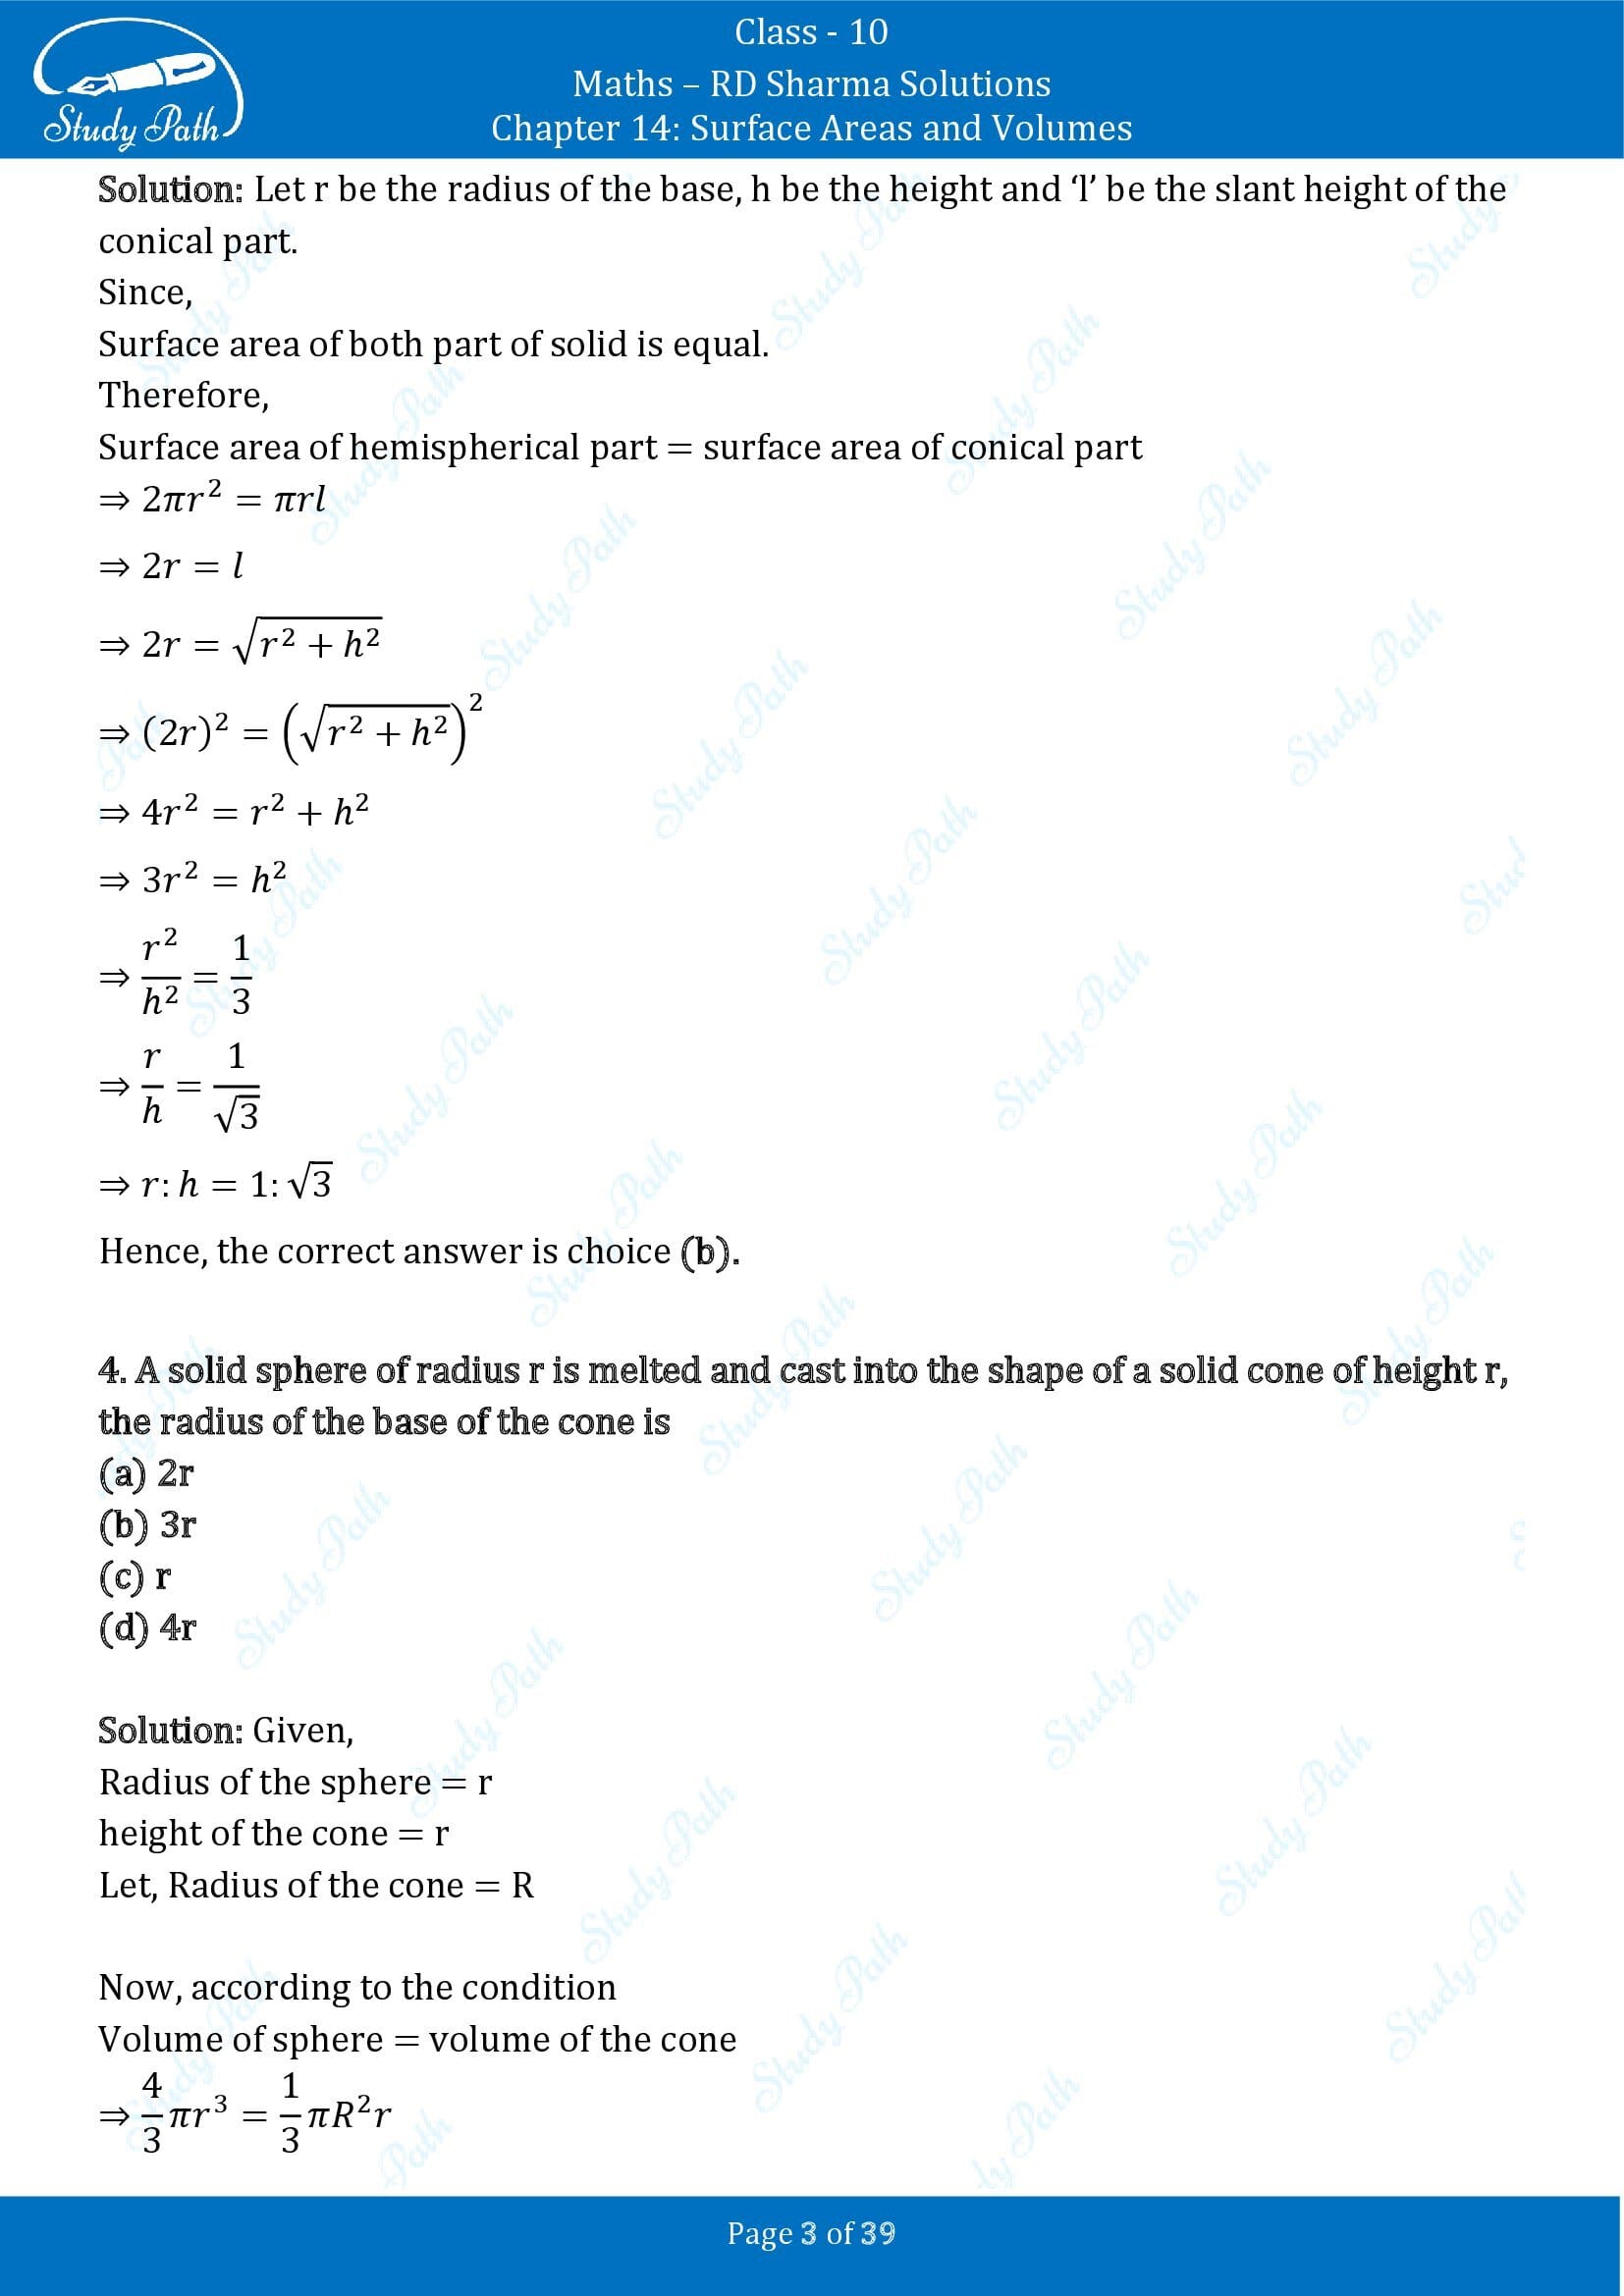 RD Sharma Solutions Class 10 Chapter 14 Surface Areas and Volumes Multiple Choice Question MCQs 00003